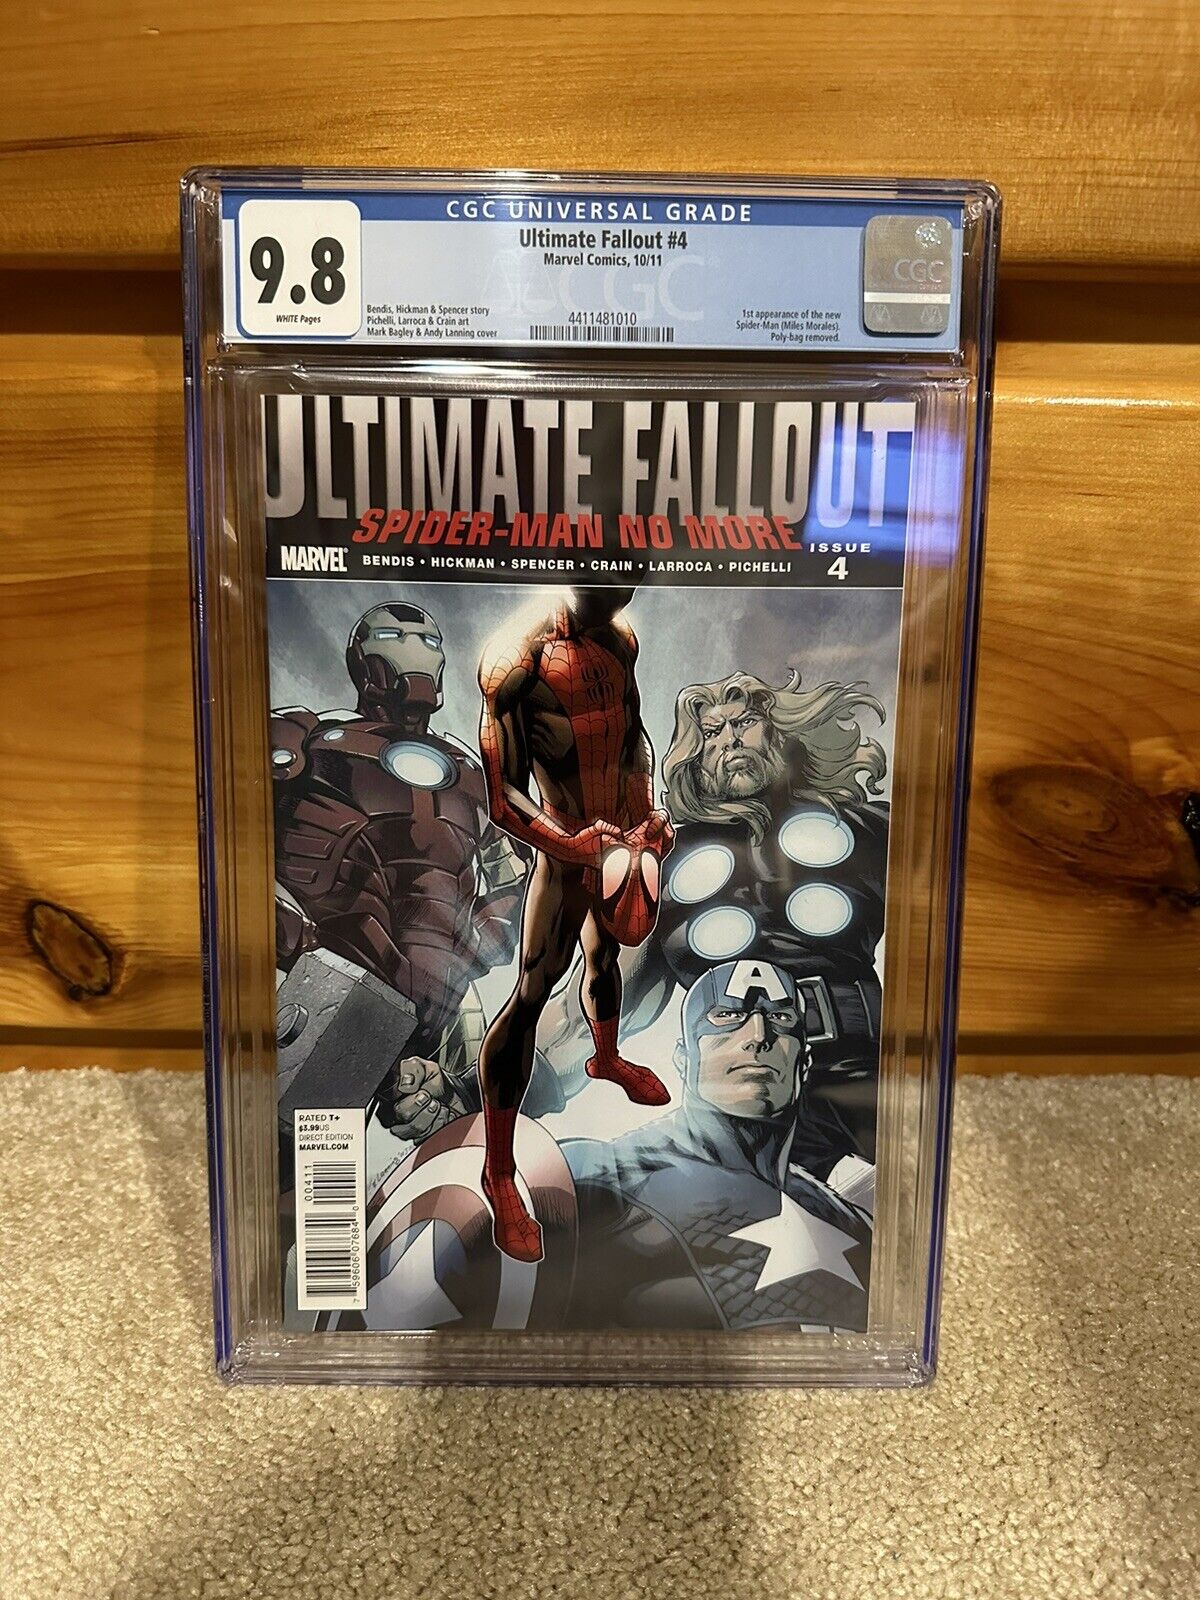 CGC ULTIMATE FALLOUT #4 2011 MARVEL 9.8 1ST APP OF MILES MORALES 1ST PRINT